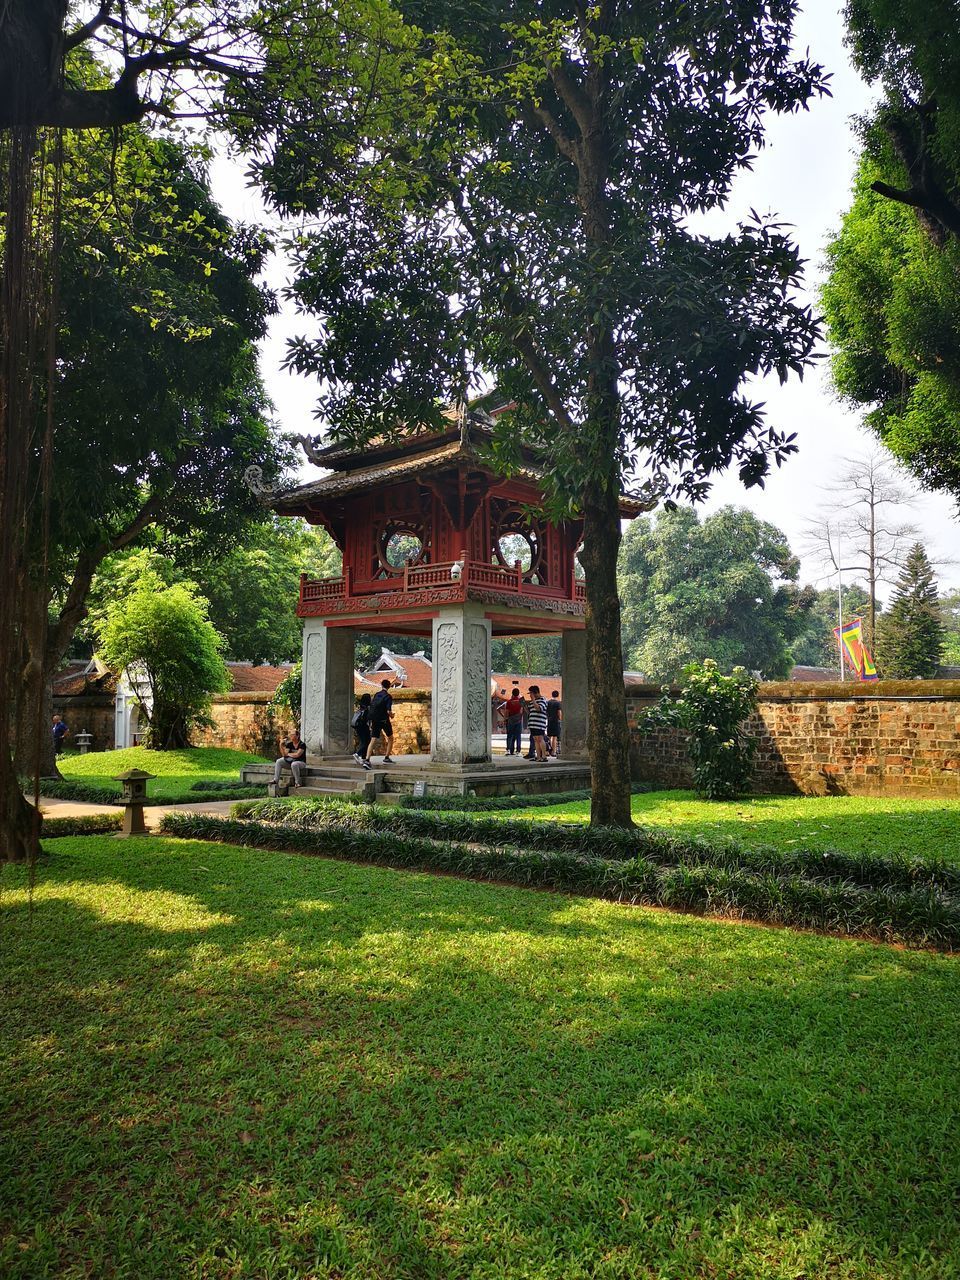 TREES AND LAWN IN FRONT OF TEMPLE